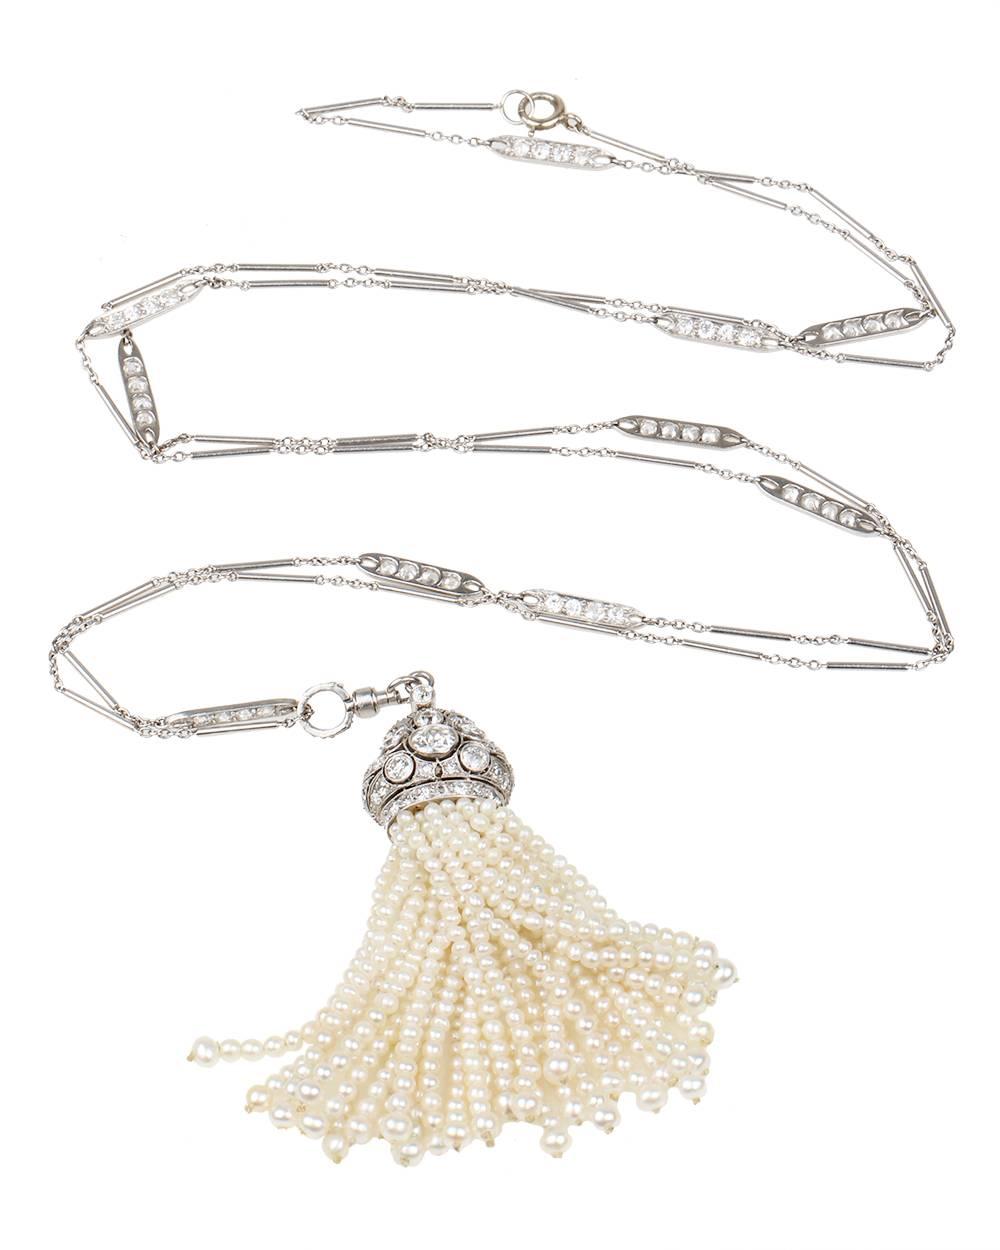 Art Deco Pearl and Diamond Sautoir Tassel Necklace In Excellent Condition For Sale In Austin, TX